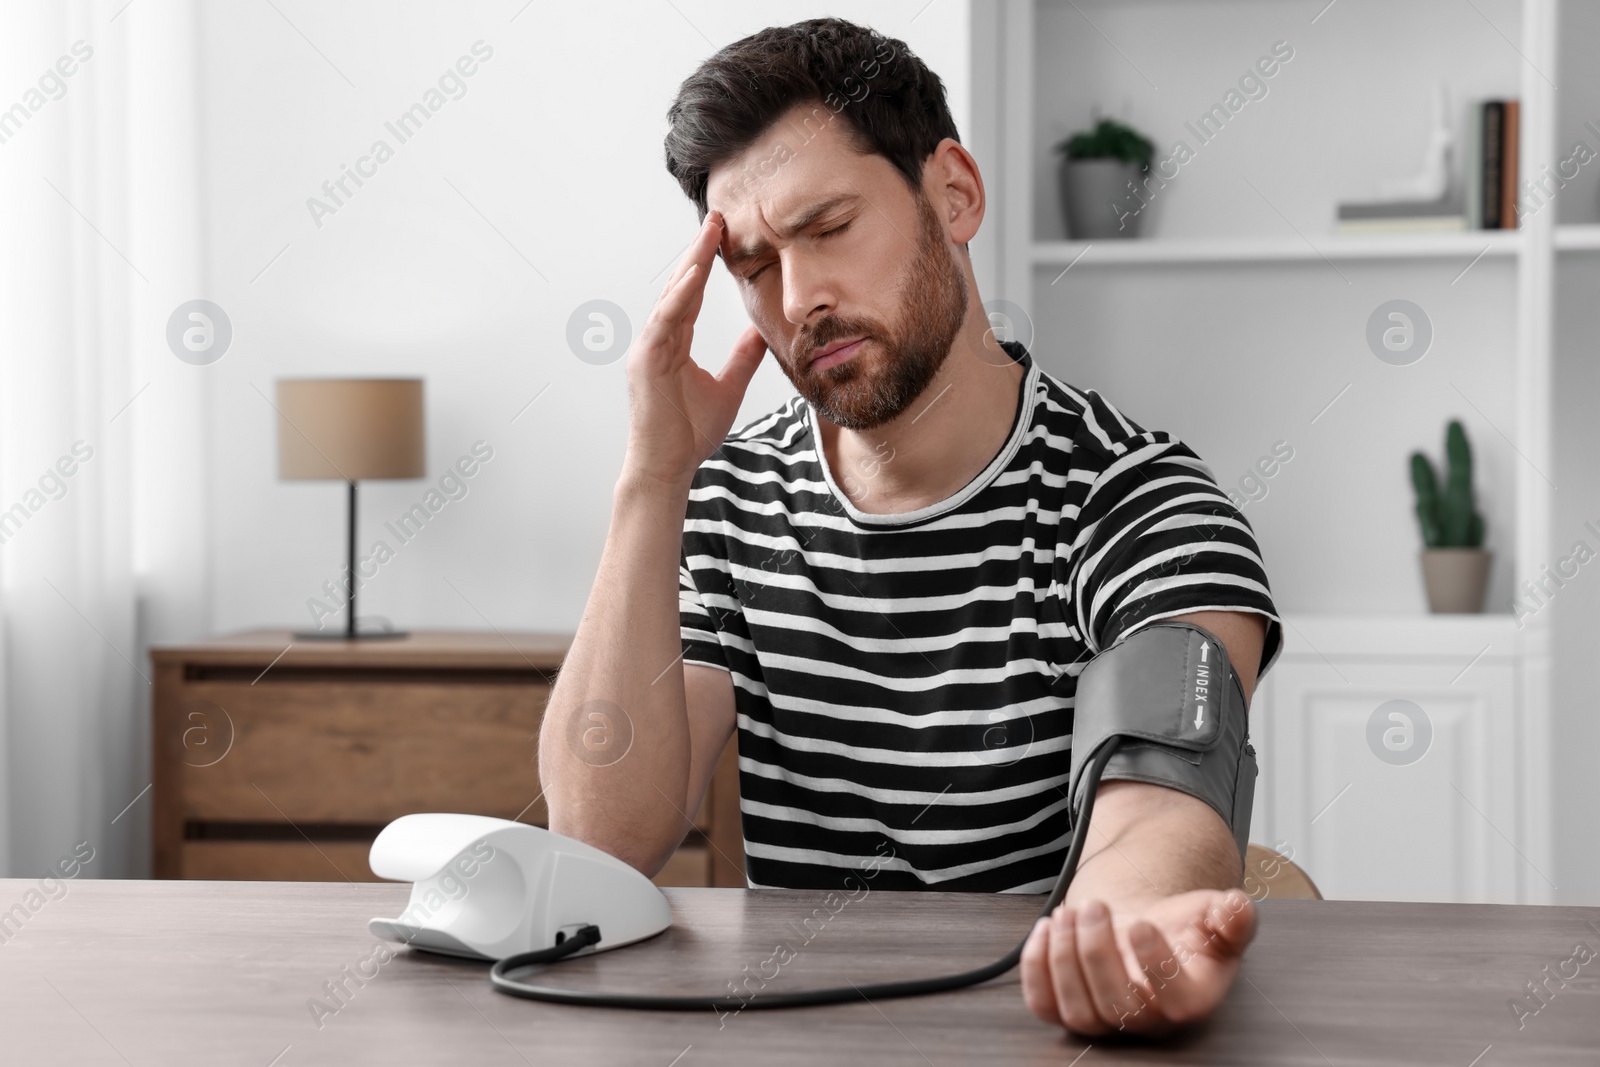 Photo of Man suffering from headache and measuring blood pressure in room